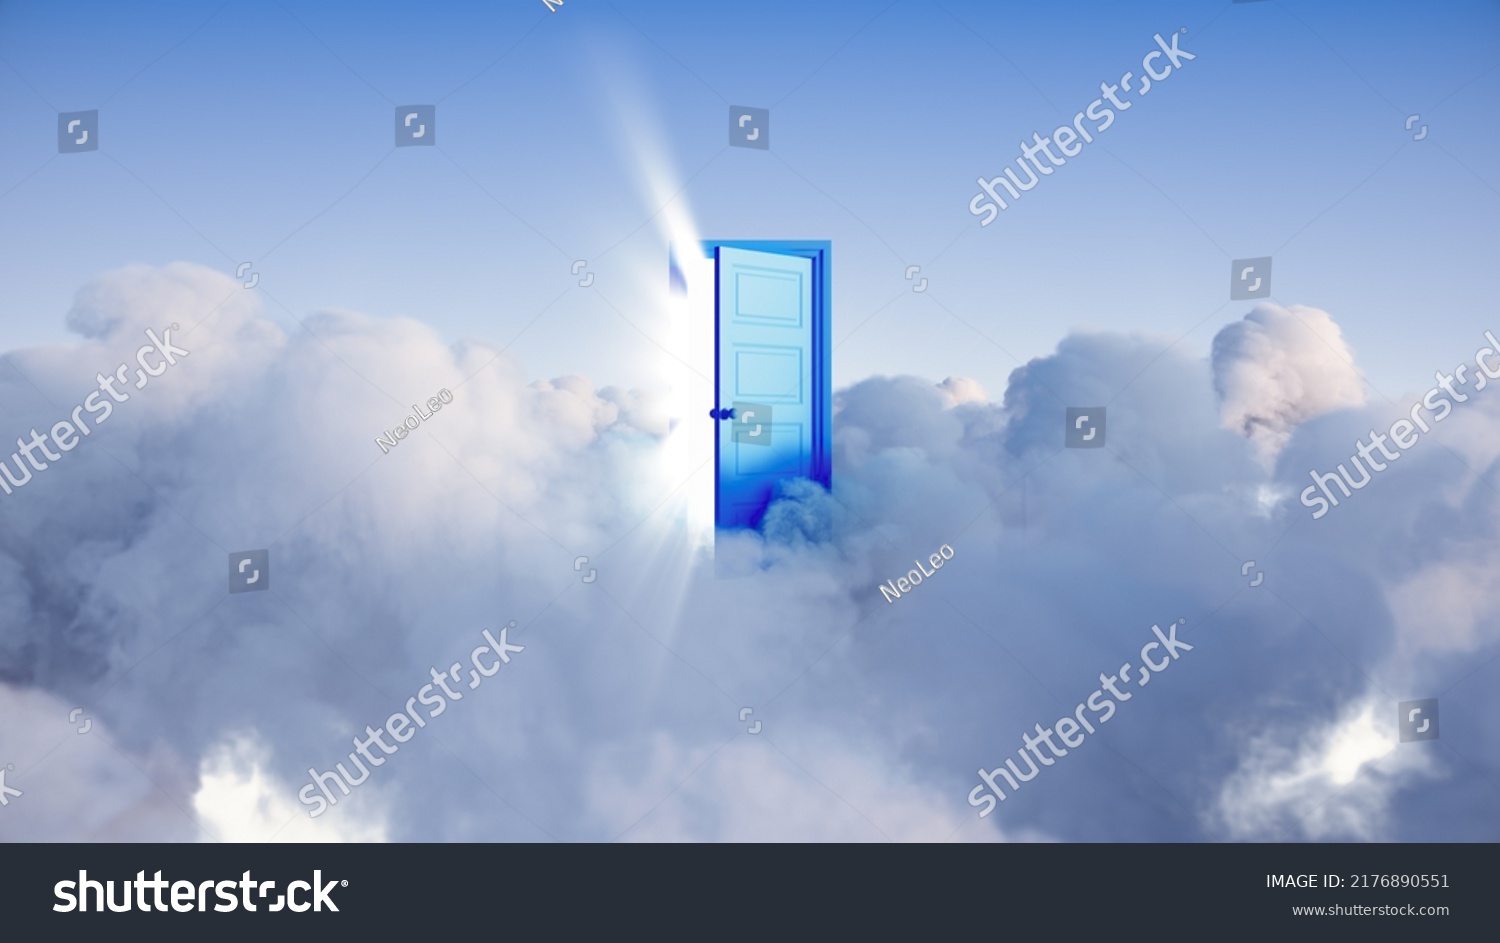 3d rendering, abstract modern background with bright light rays shining through the opening blue door in the sky with clouds, hope concept #2176890551